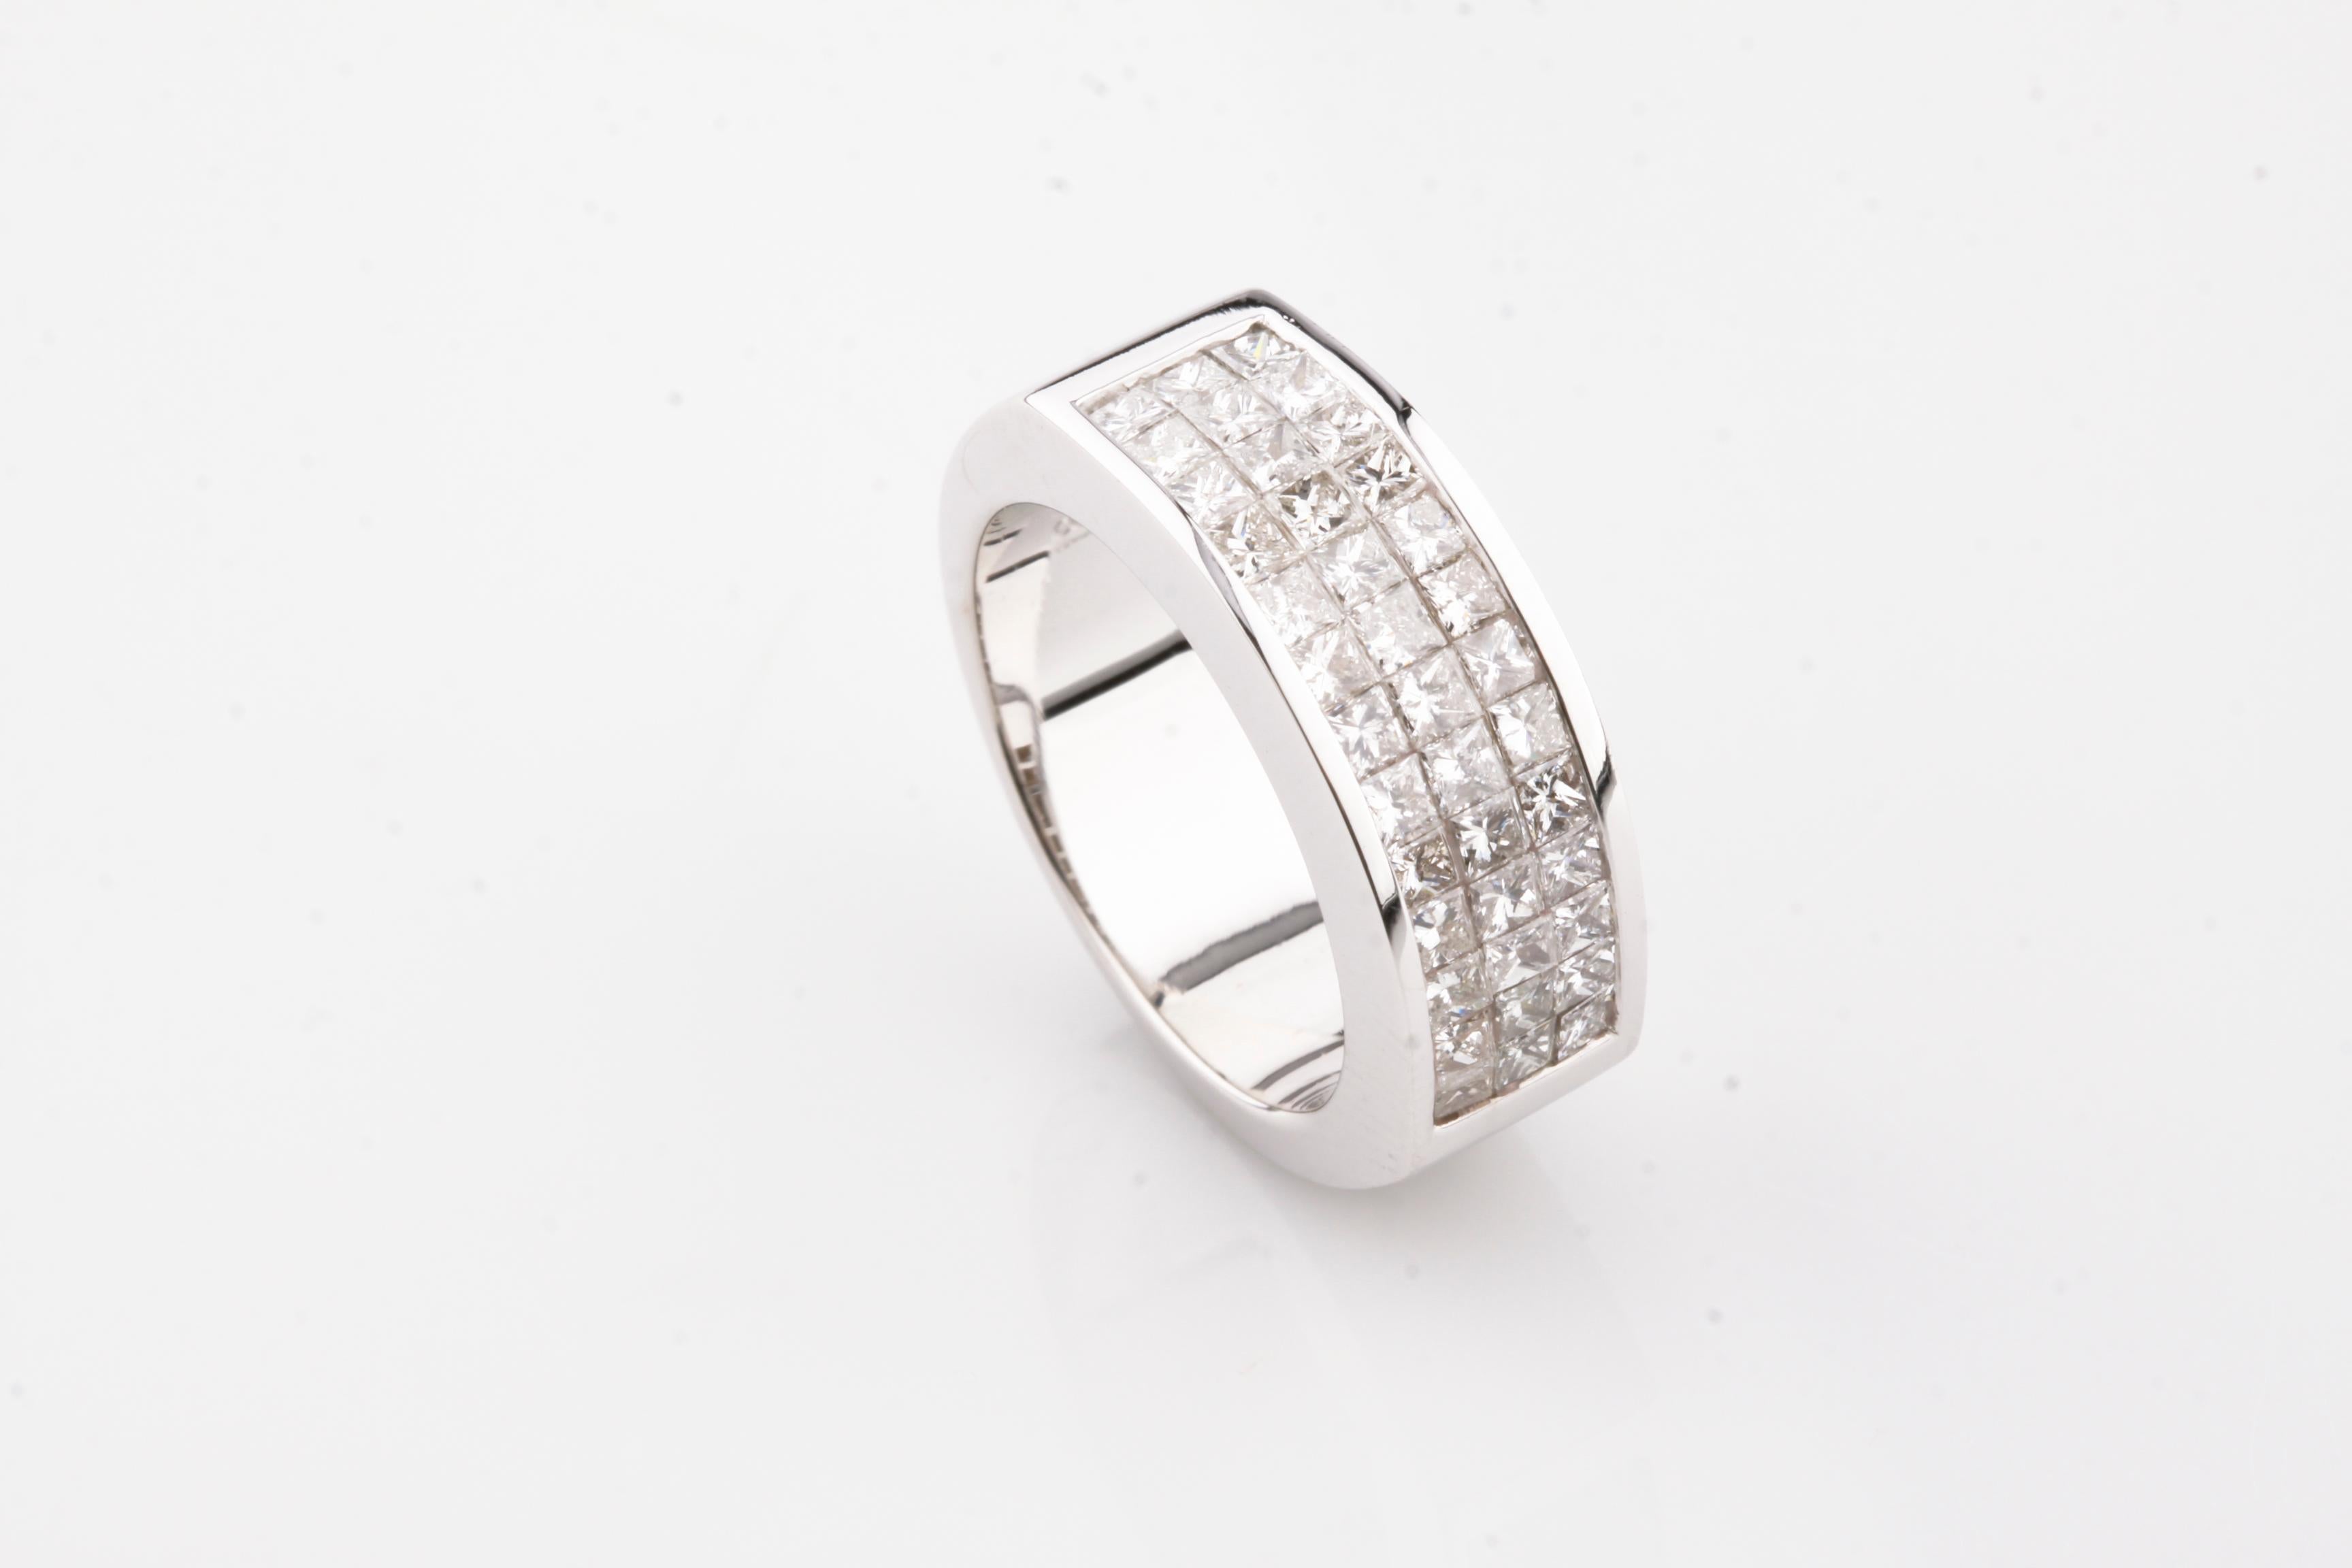 Features Princess Cut Invisible Set Diamond Plaque
Total Diamond Weight = 1.60 ct
Average Color = G - H
Average Clarity = VS - SI
Size 6
Total Mass = 12.05 grams
Width of Front = 8 mm
Width of Band at Reverse = 7 mm
Gorgeous Ring!